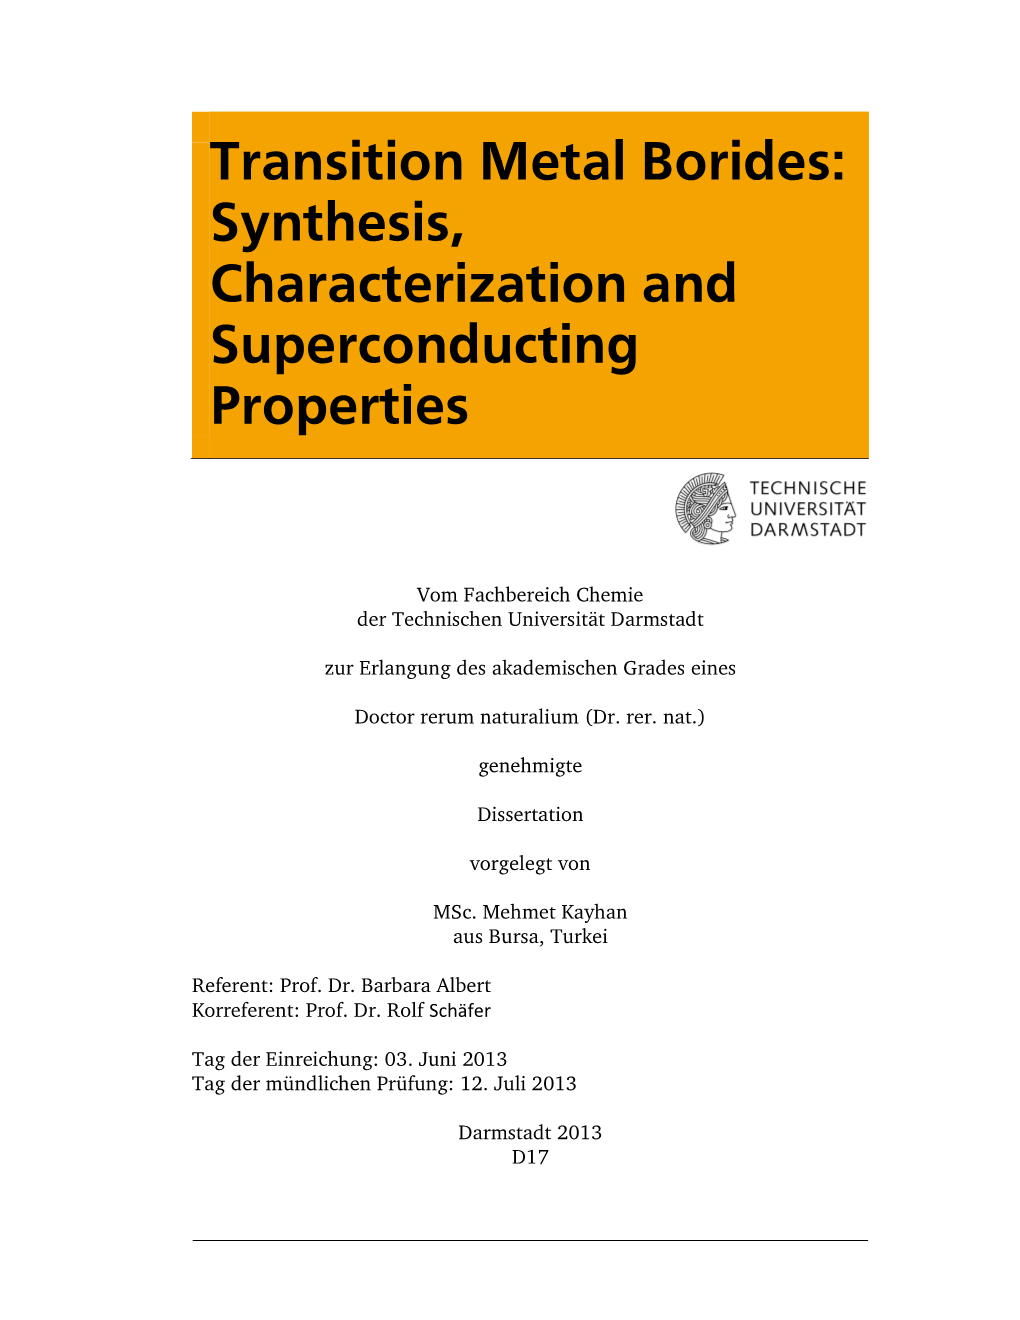 Transition Metal Borides: Synthesis, Characterization and Superconducting Properties